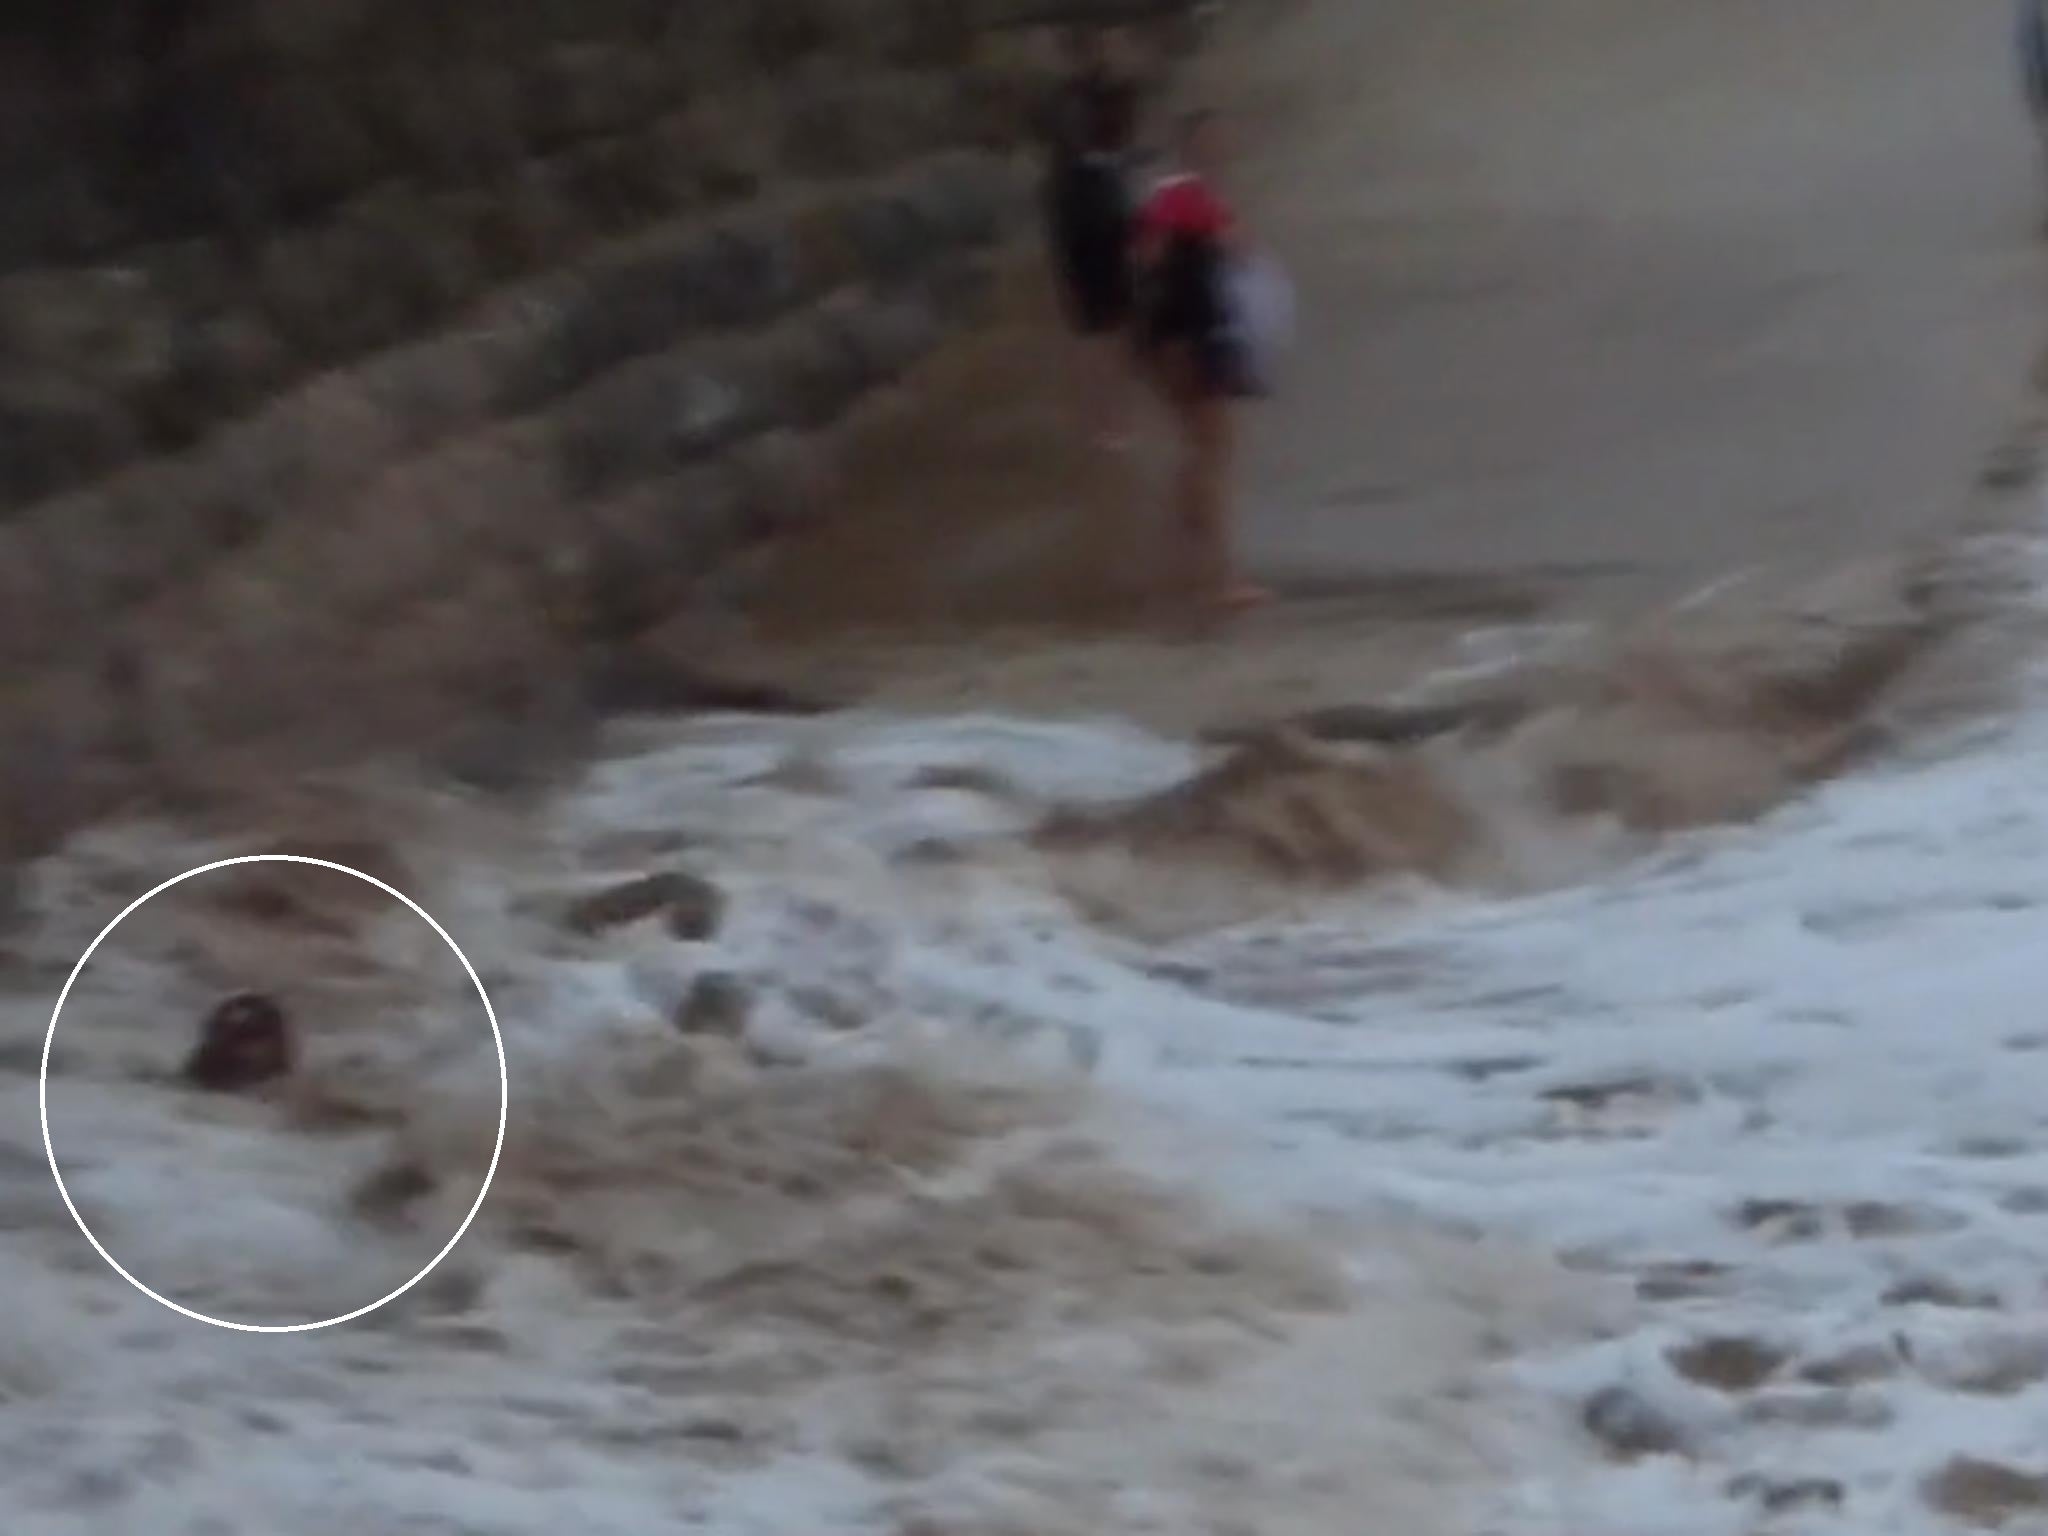 One moment the woman is dancing on the beach and the next she is swept away by a giant wave